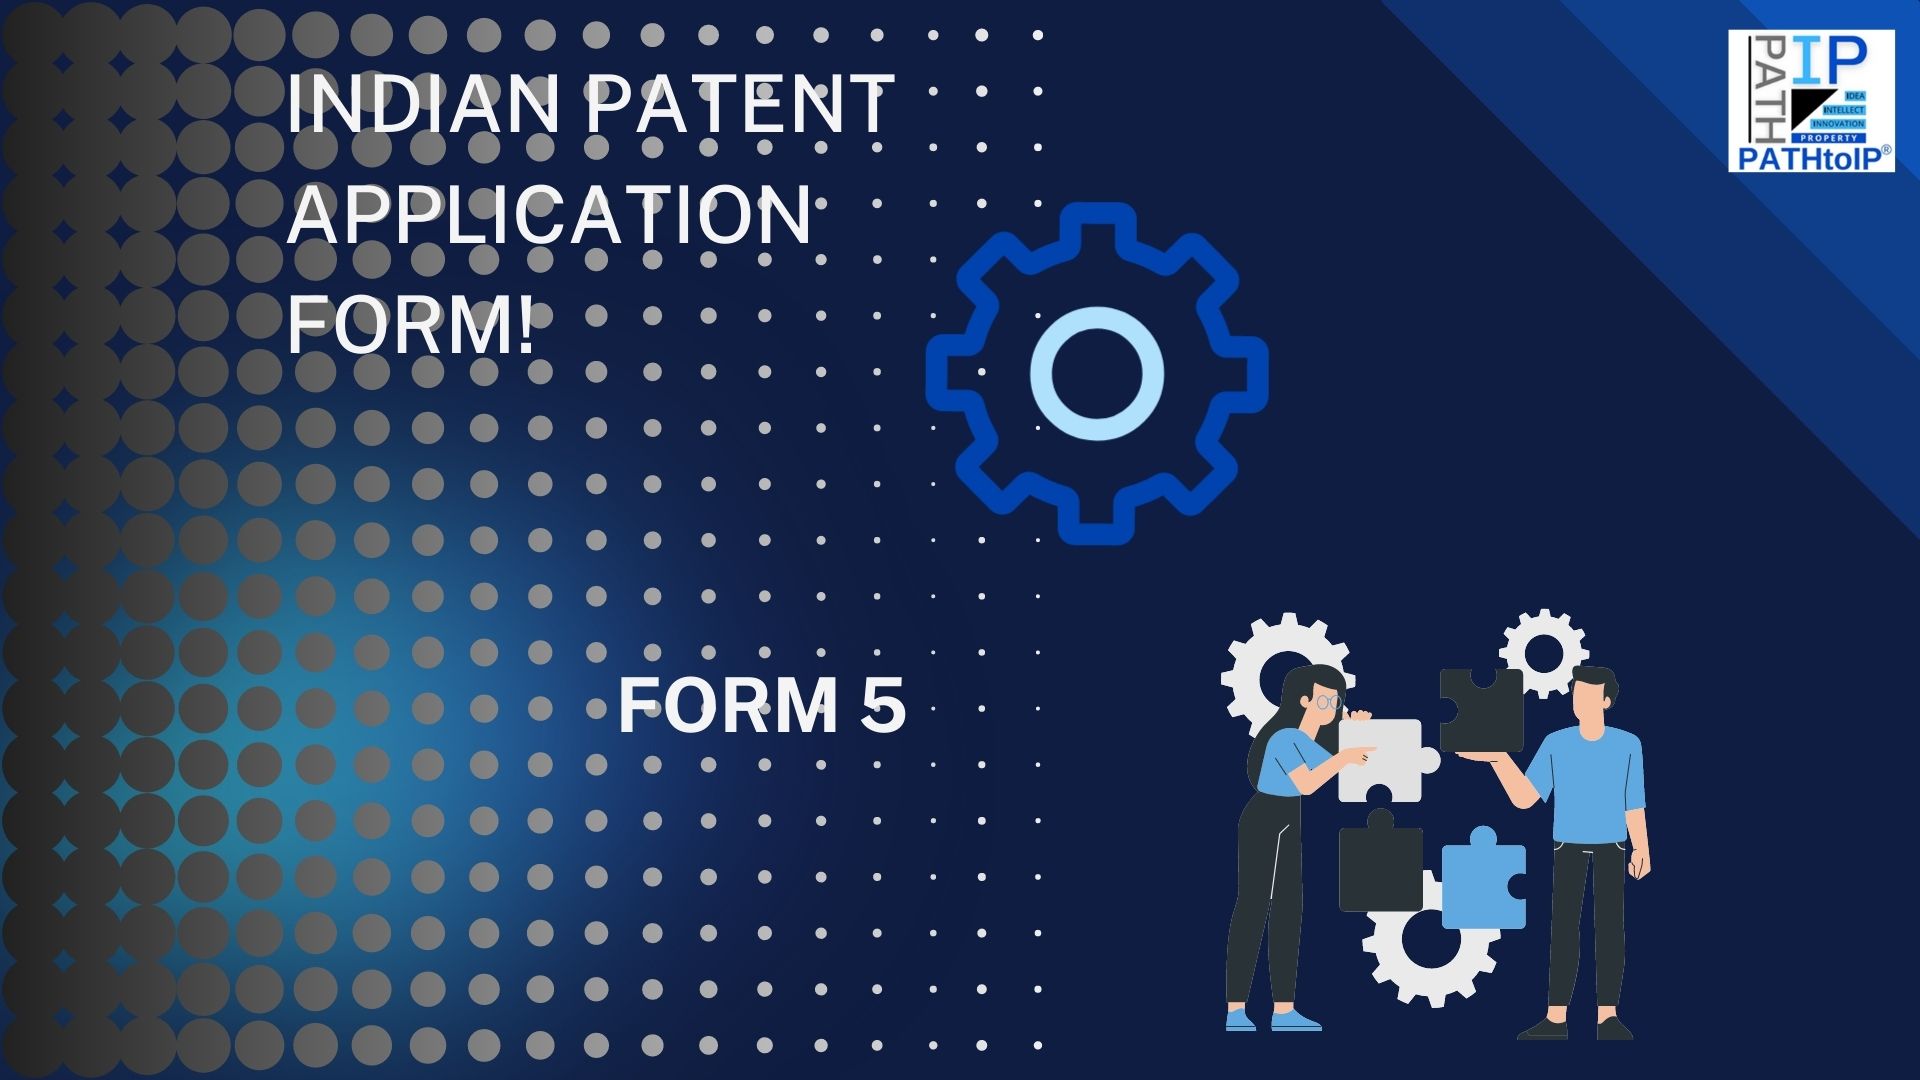 Indian Patent Forms: FORM 5